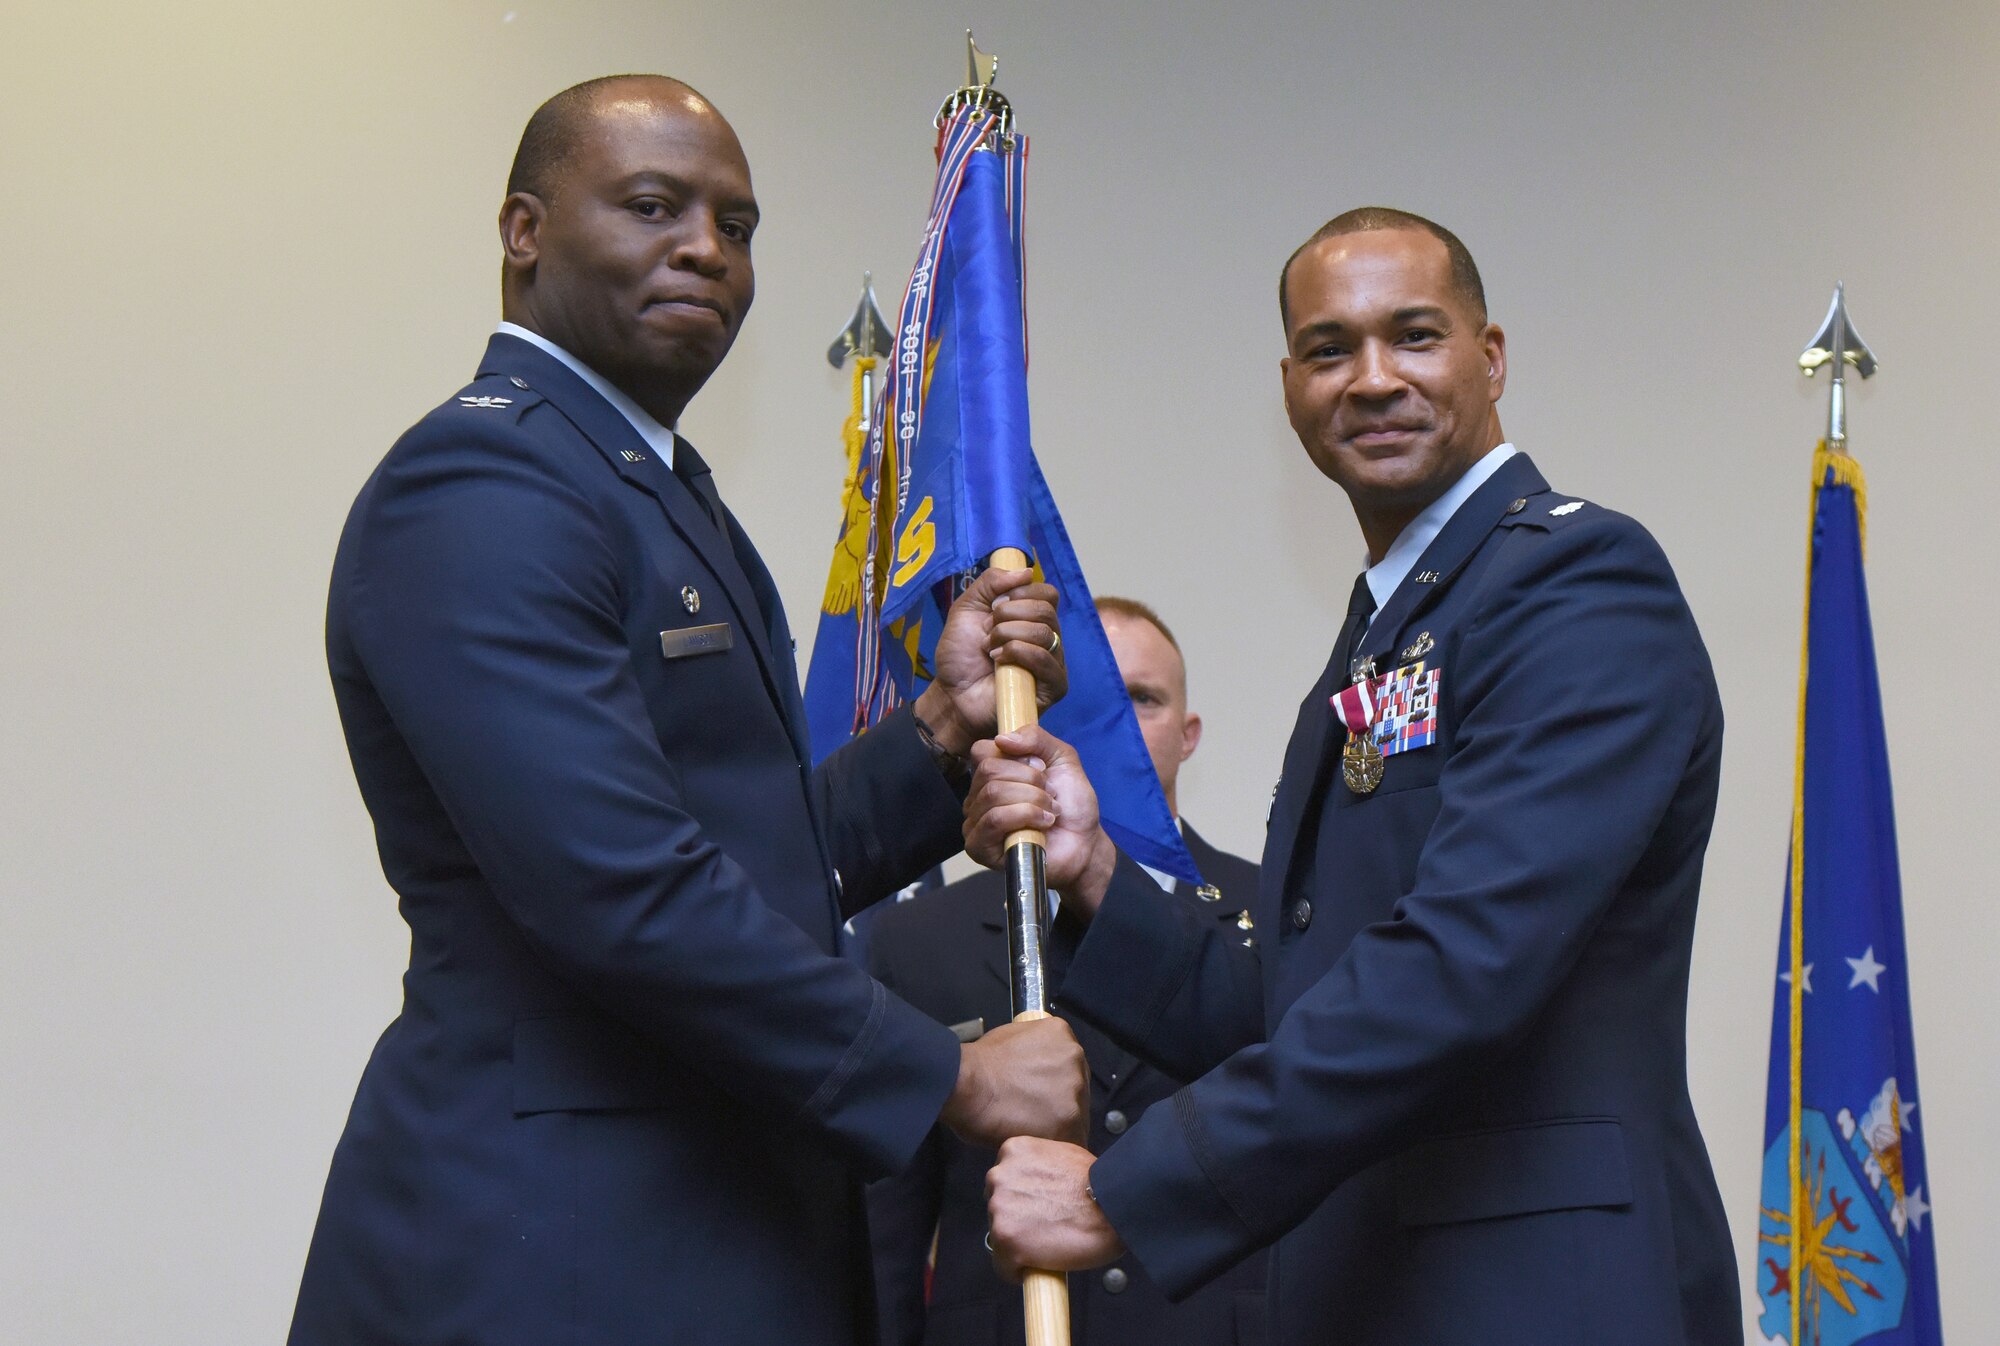 U.S. Air Force Col. Leo Lawson Jr., 81st Training Group commander, takes the 334th Training Squadron guidon from Lt. Col. Billy Wilson, Jr., outgoing 334th TRS commander, during the 334th TRS change of command ceremony in the Roberts Consolidated Aircraft Maintenance Facility at Keesler Air Force Base, Mississippi, May 23, 2019. The passing of the guidon is a ceremonial symbol of exchanging command from one commander to another. (U.S. Air Force photo by Kemberly Groue)